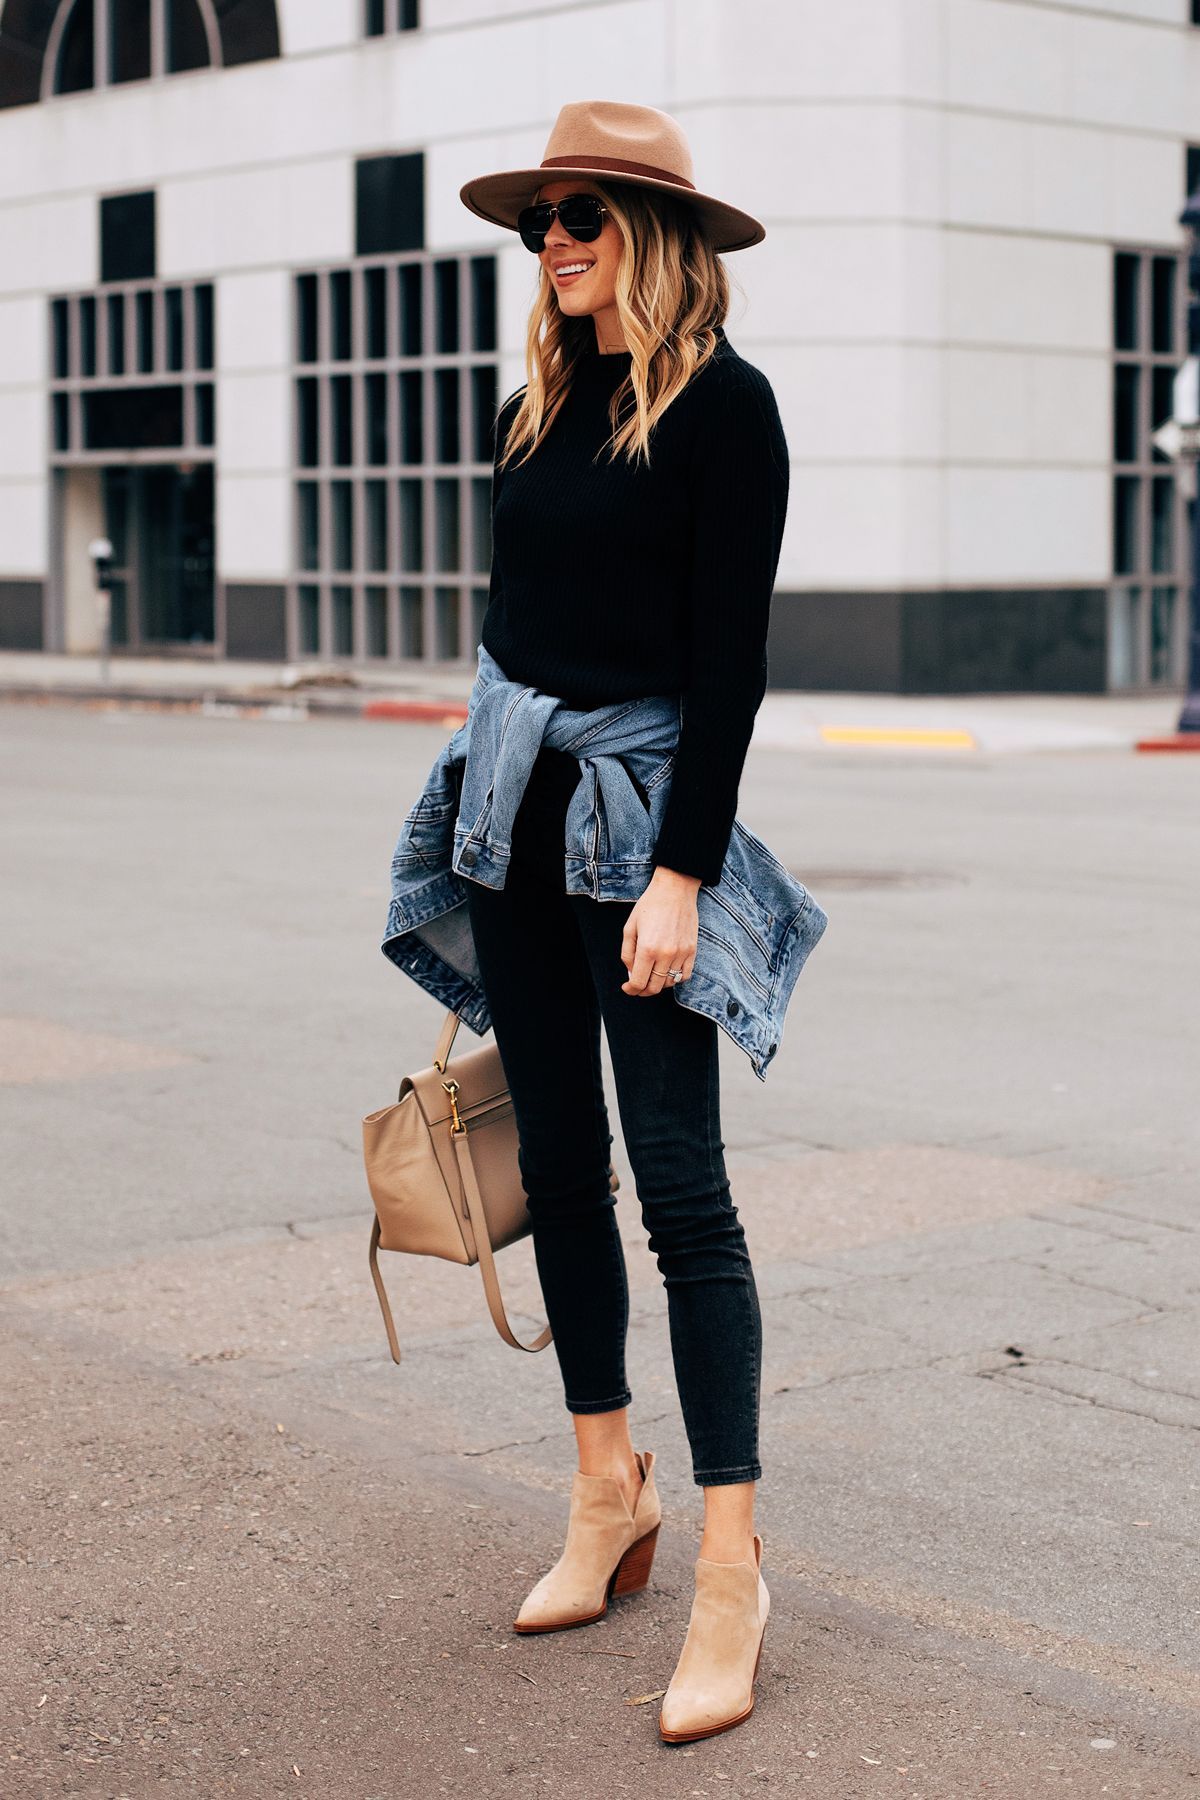 All Black Outfit, Casual Weekend Look, What to Wear this Weekend | Fashion Jackson - All Black Outfit, Casual Weekend Look, What to Wear this Weekend | Fashion Jackson -   13 style Inspiration everyday ideas